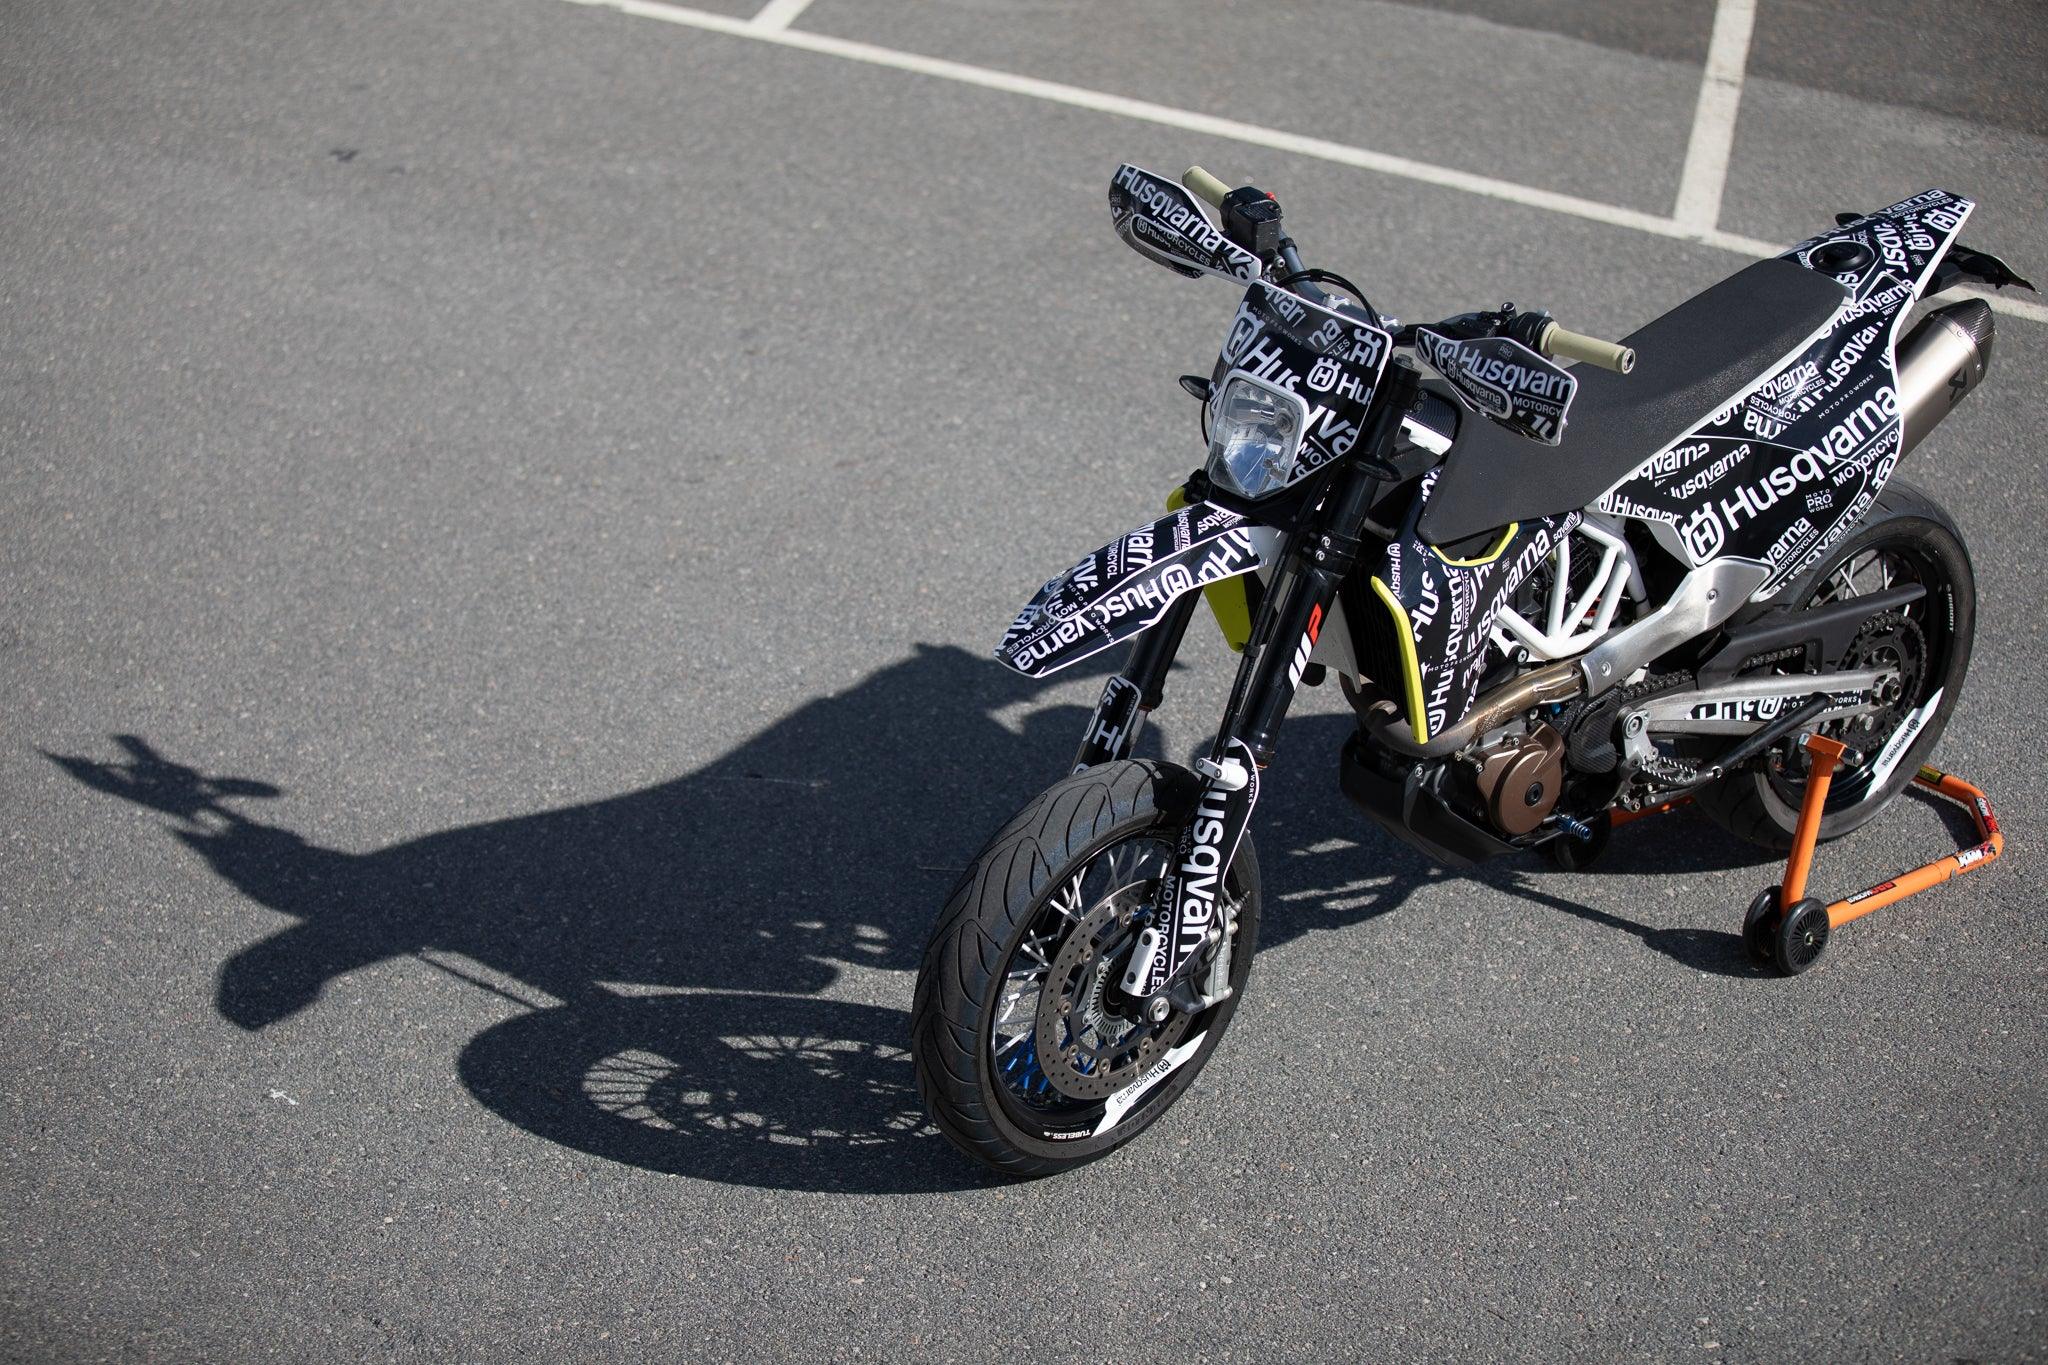 Customize Your Husqvarna 701 with Prototype and Edgerunner Graphics - MotoProWorks